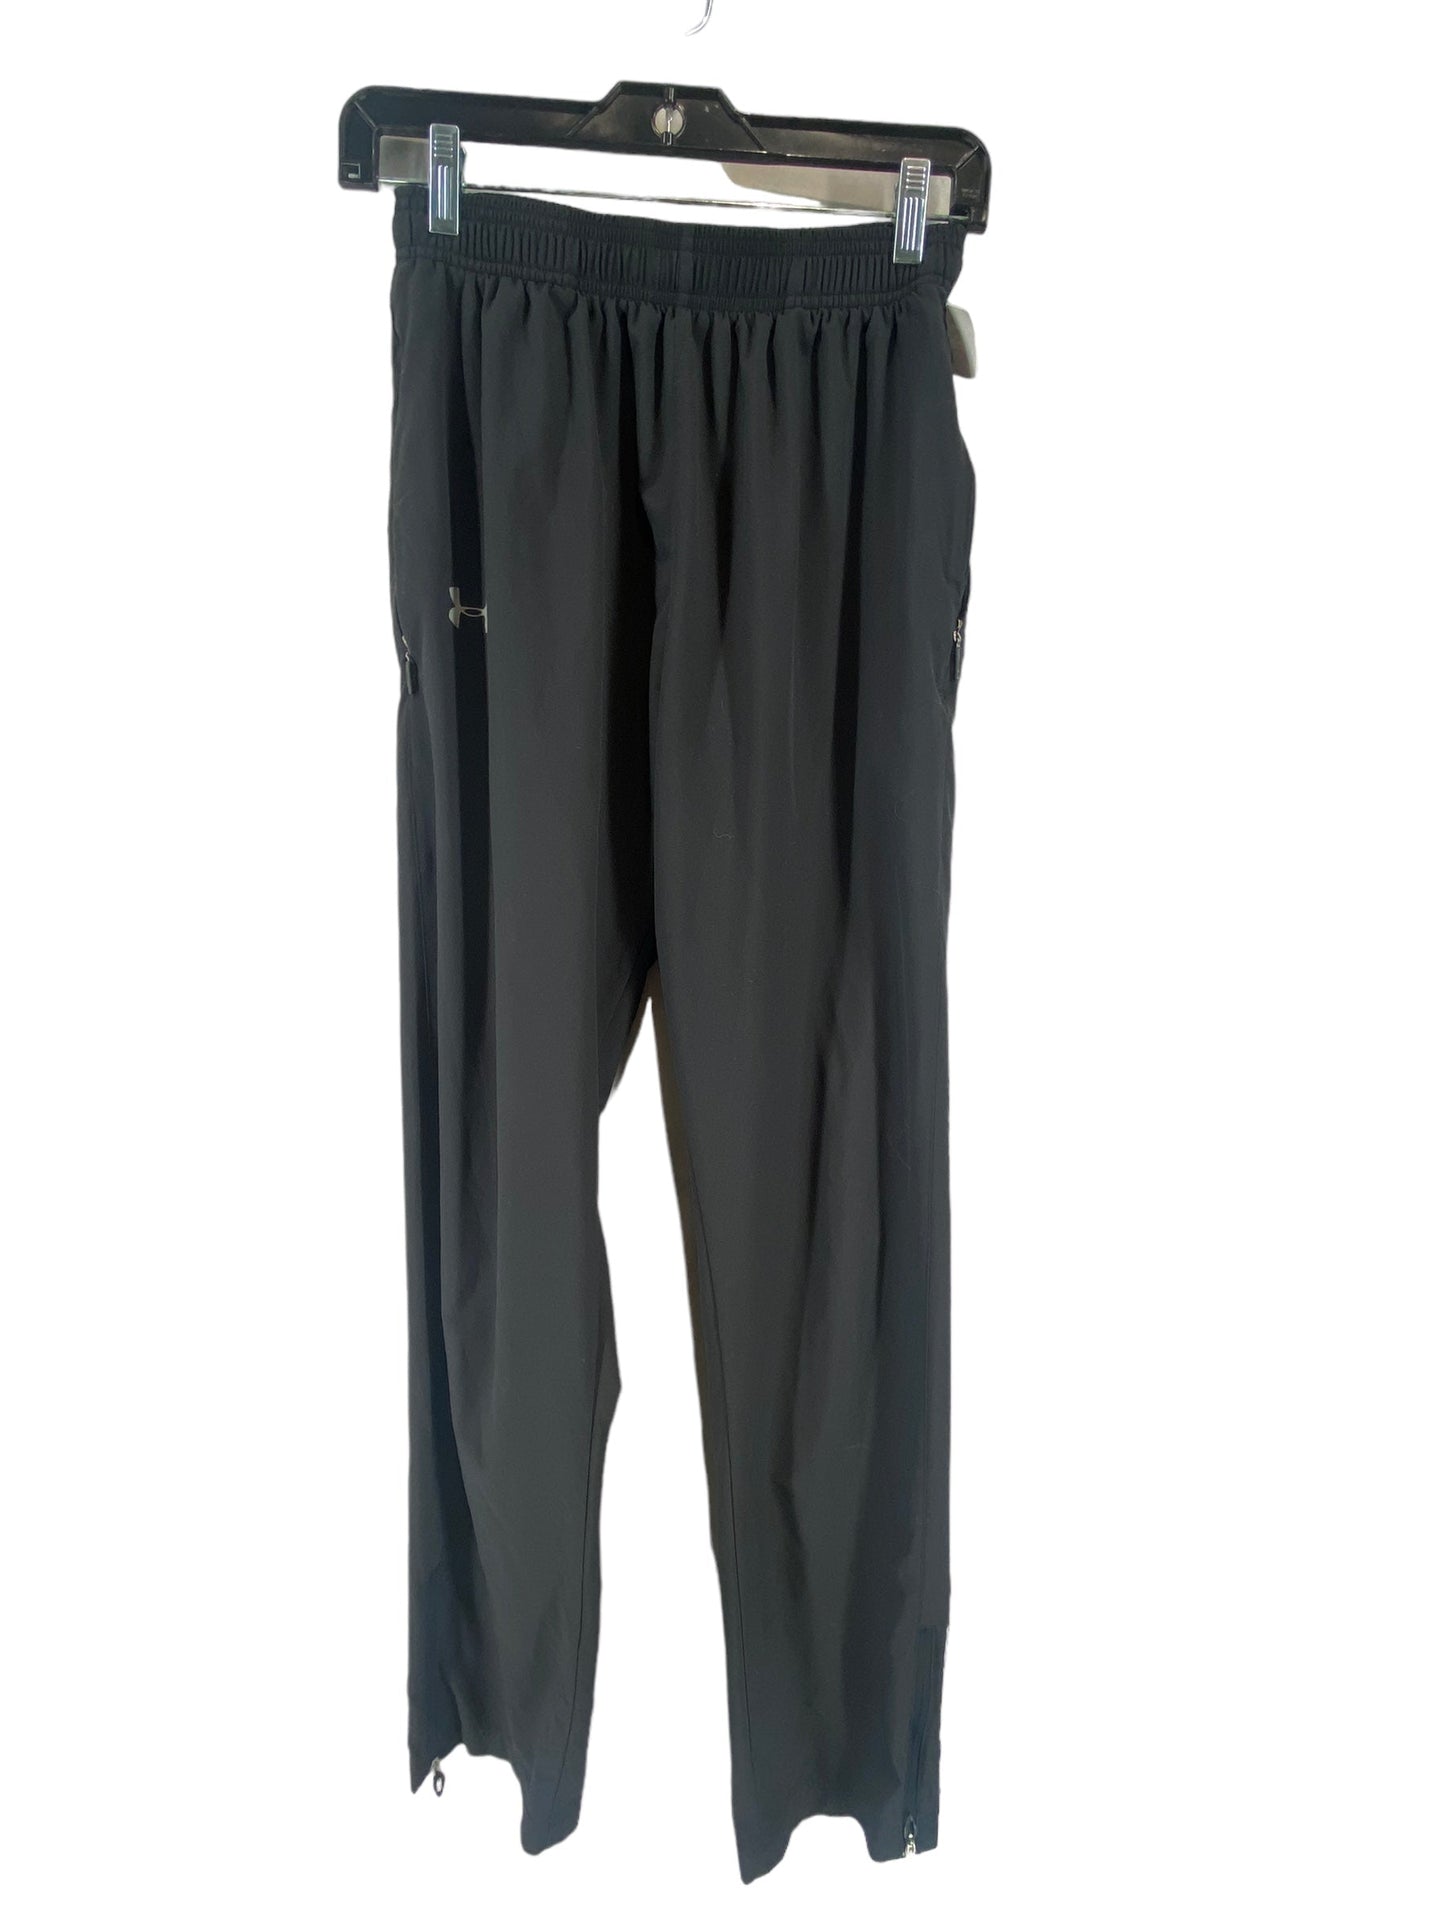 Athletic Pants By Under Armour  Size: S